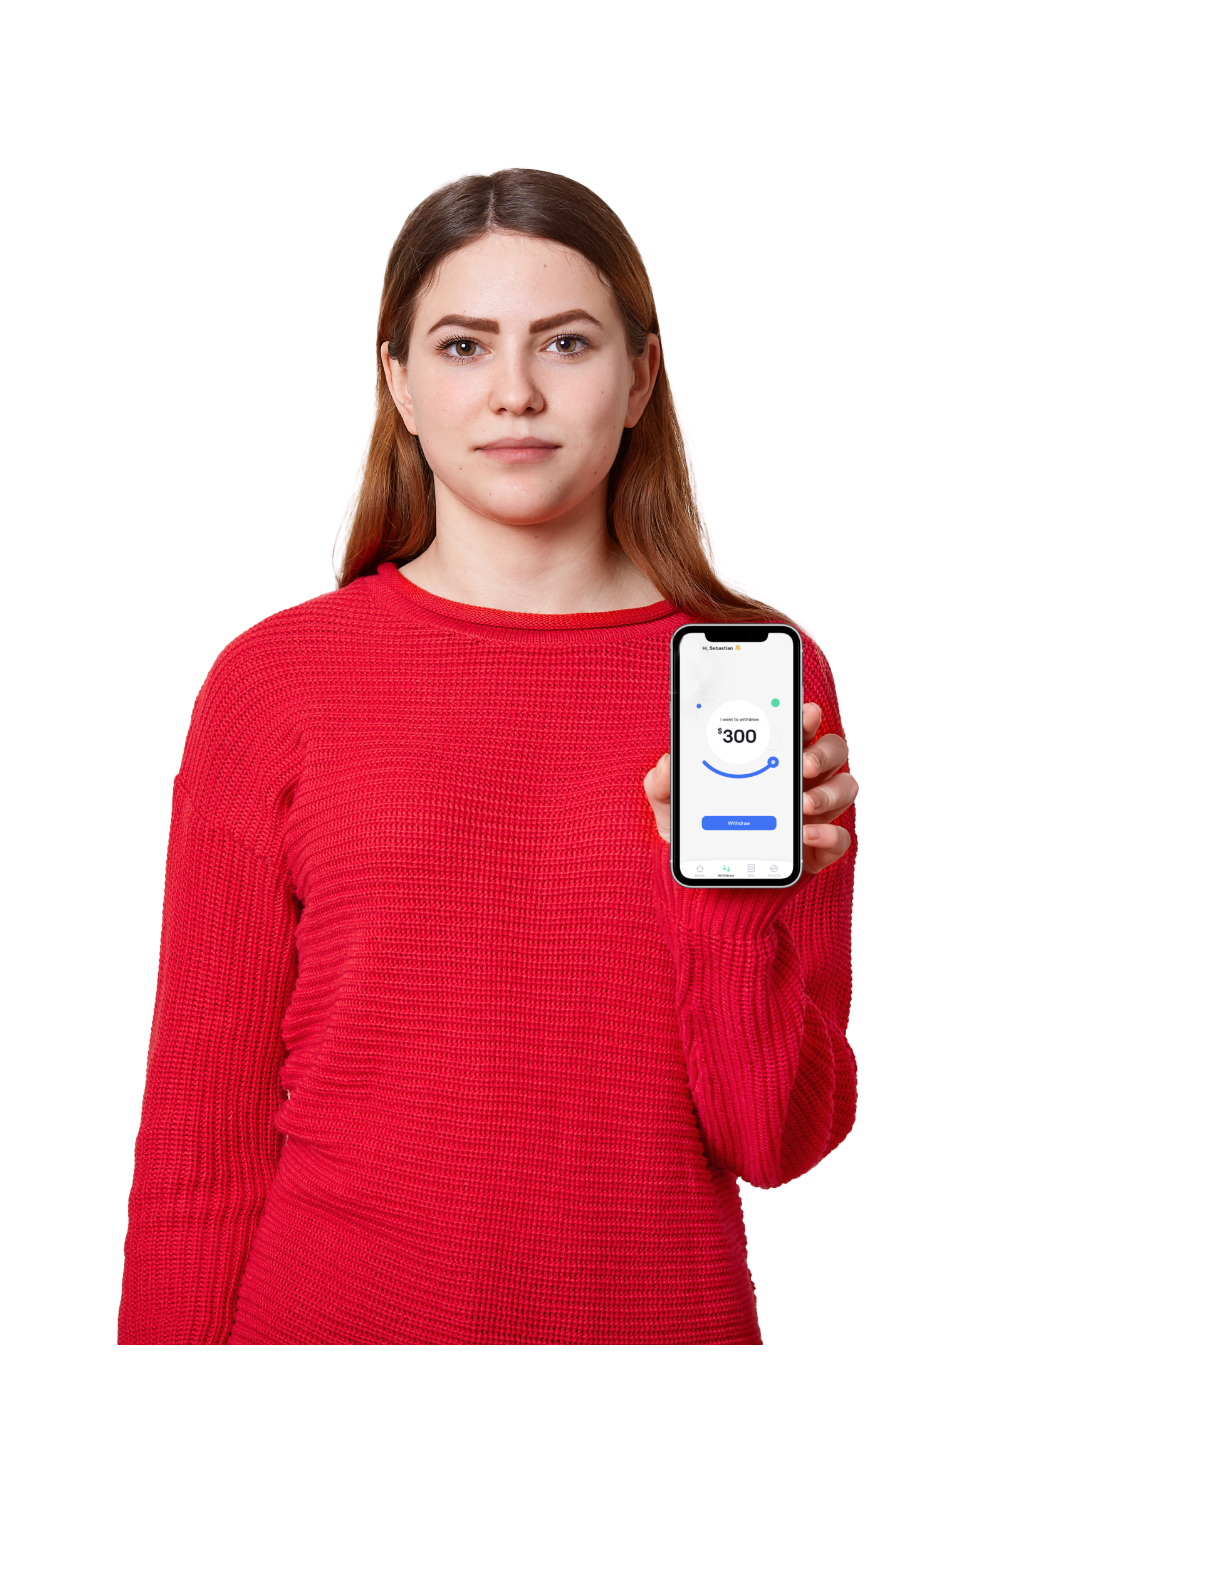 Woman red sweater with app